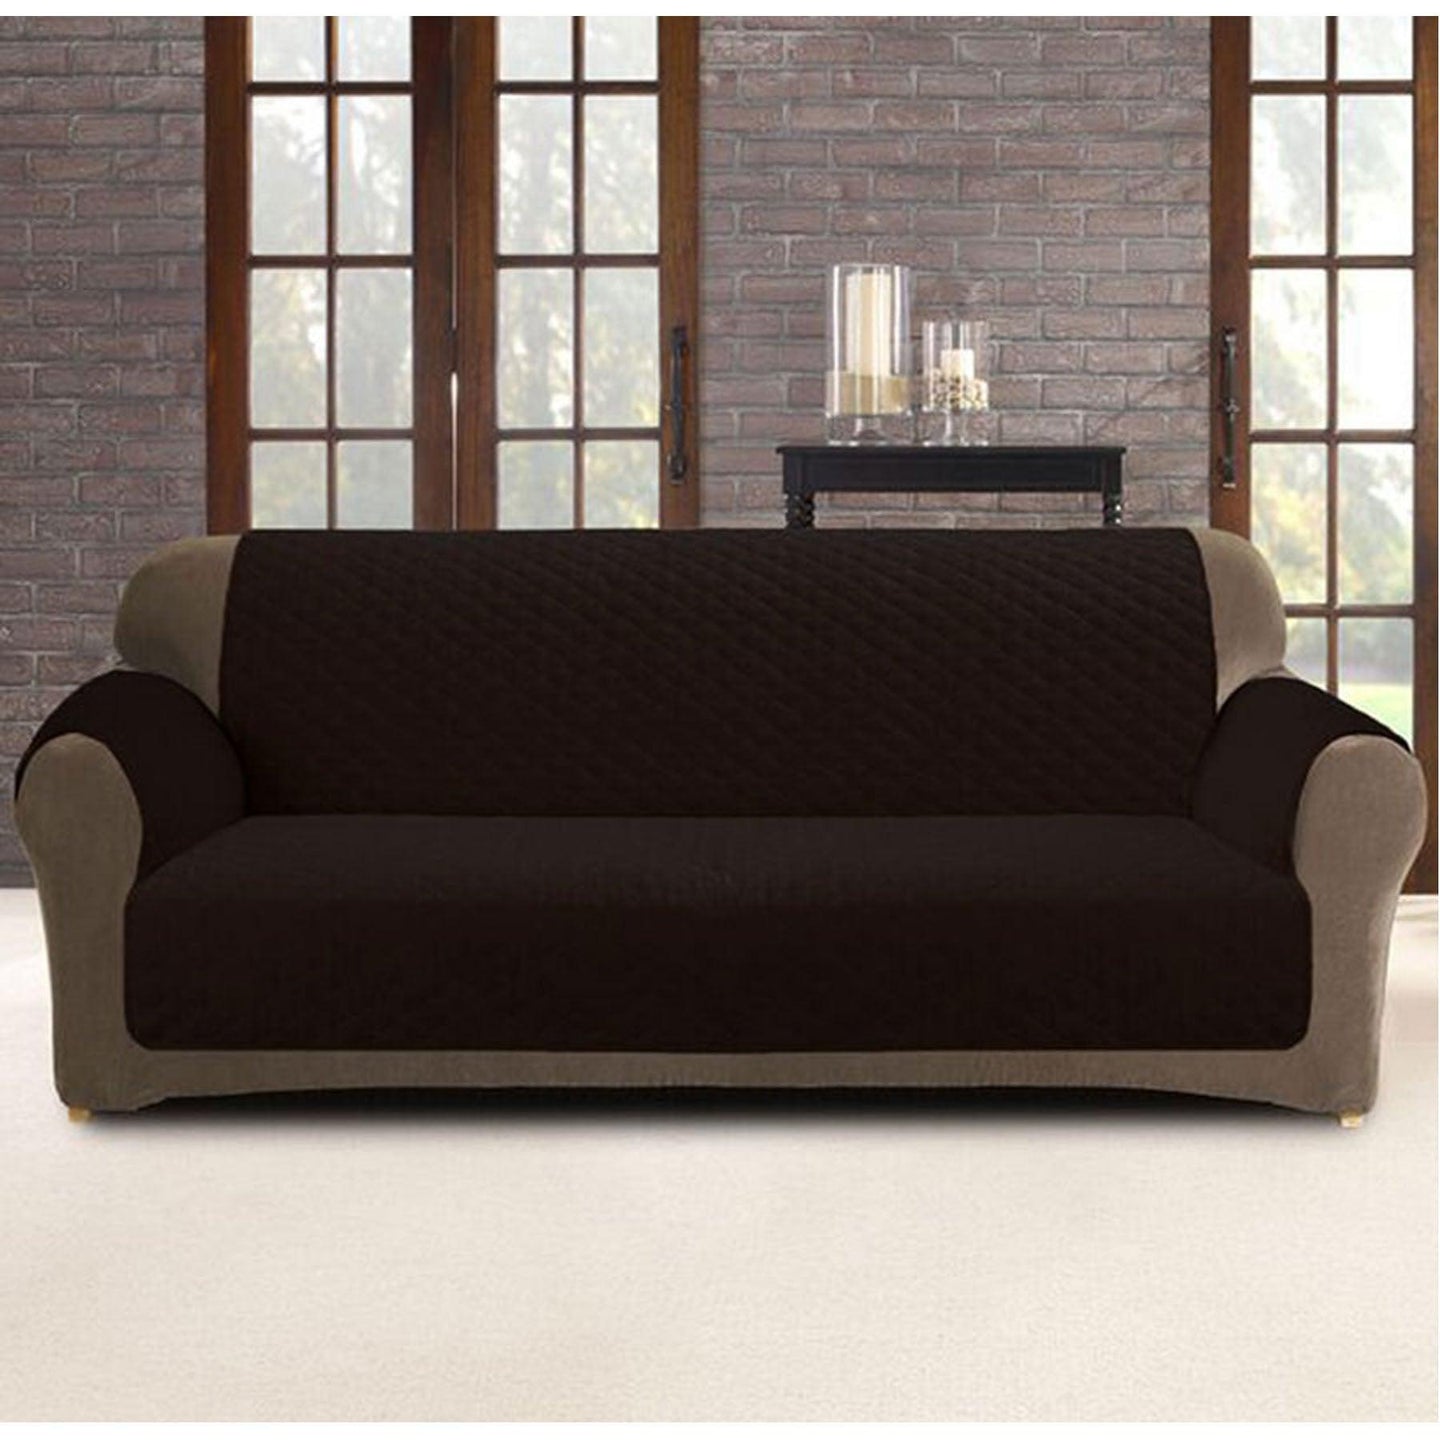 Buy Custom Fit Sofa Cover Protector Two Seater Coffee (Chocolate) discounted | Products On Sale Australia